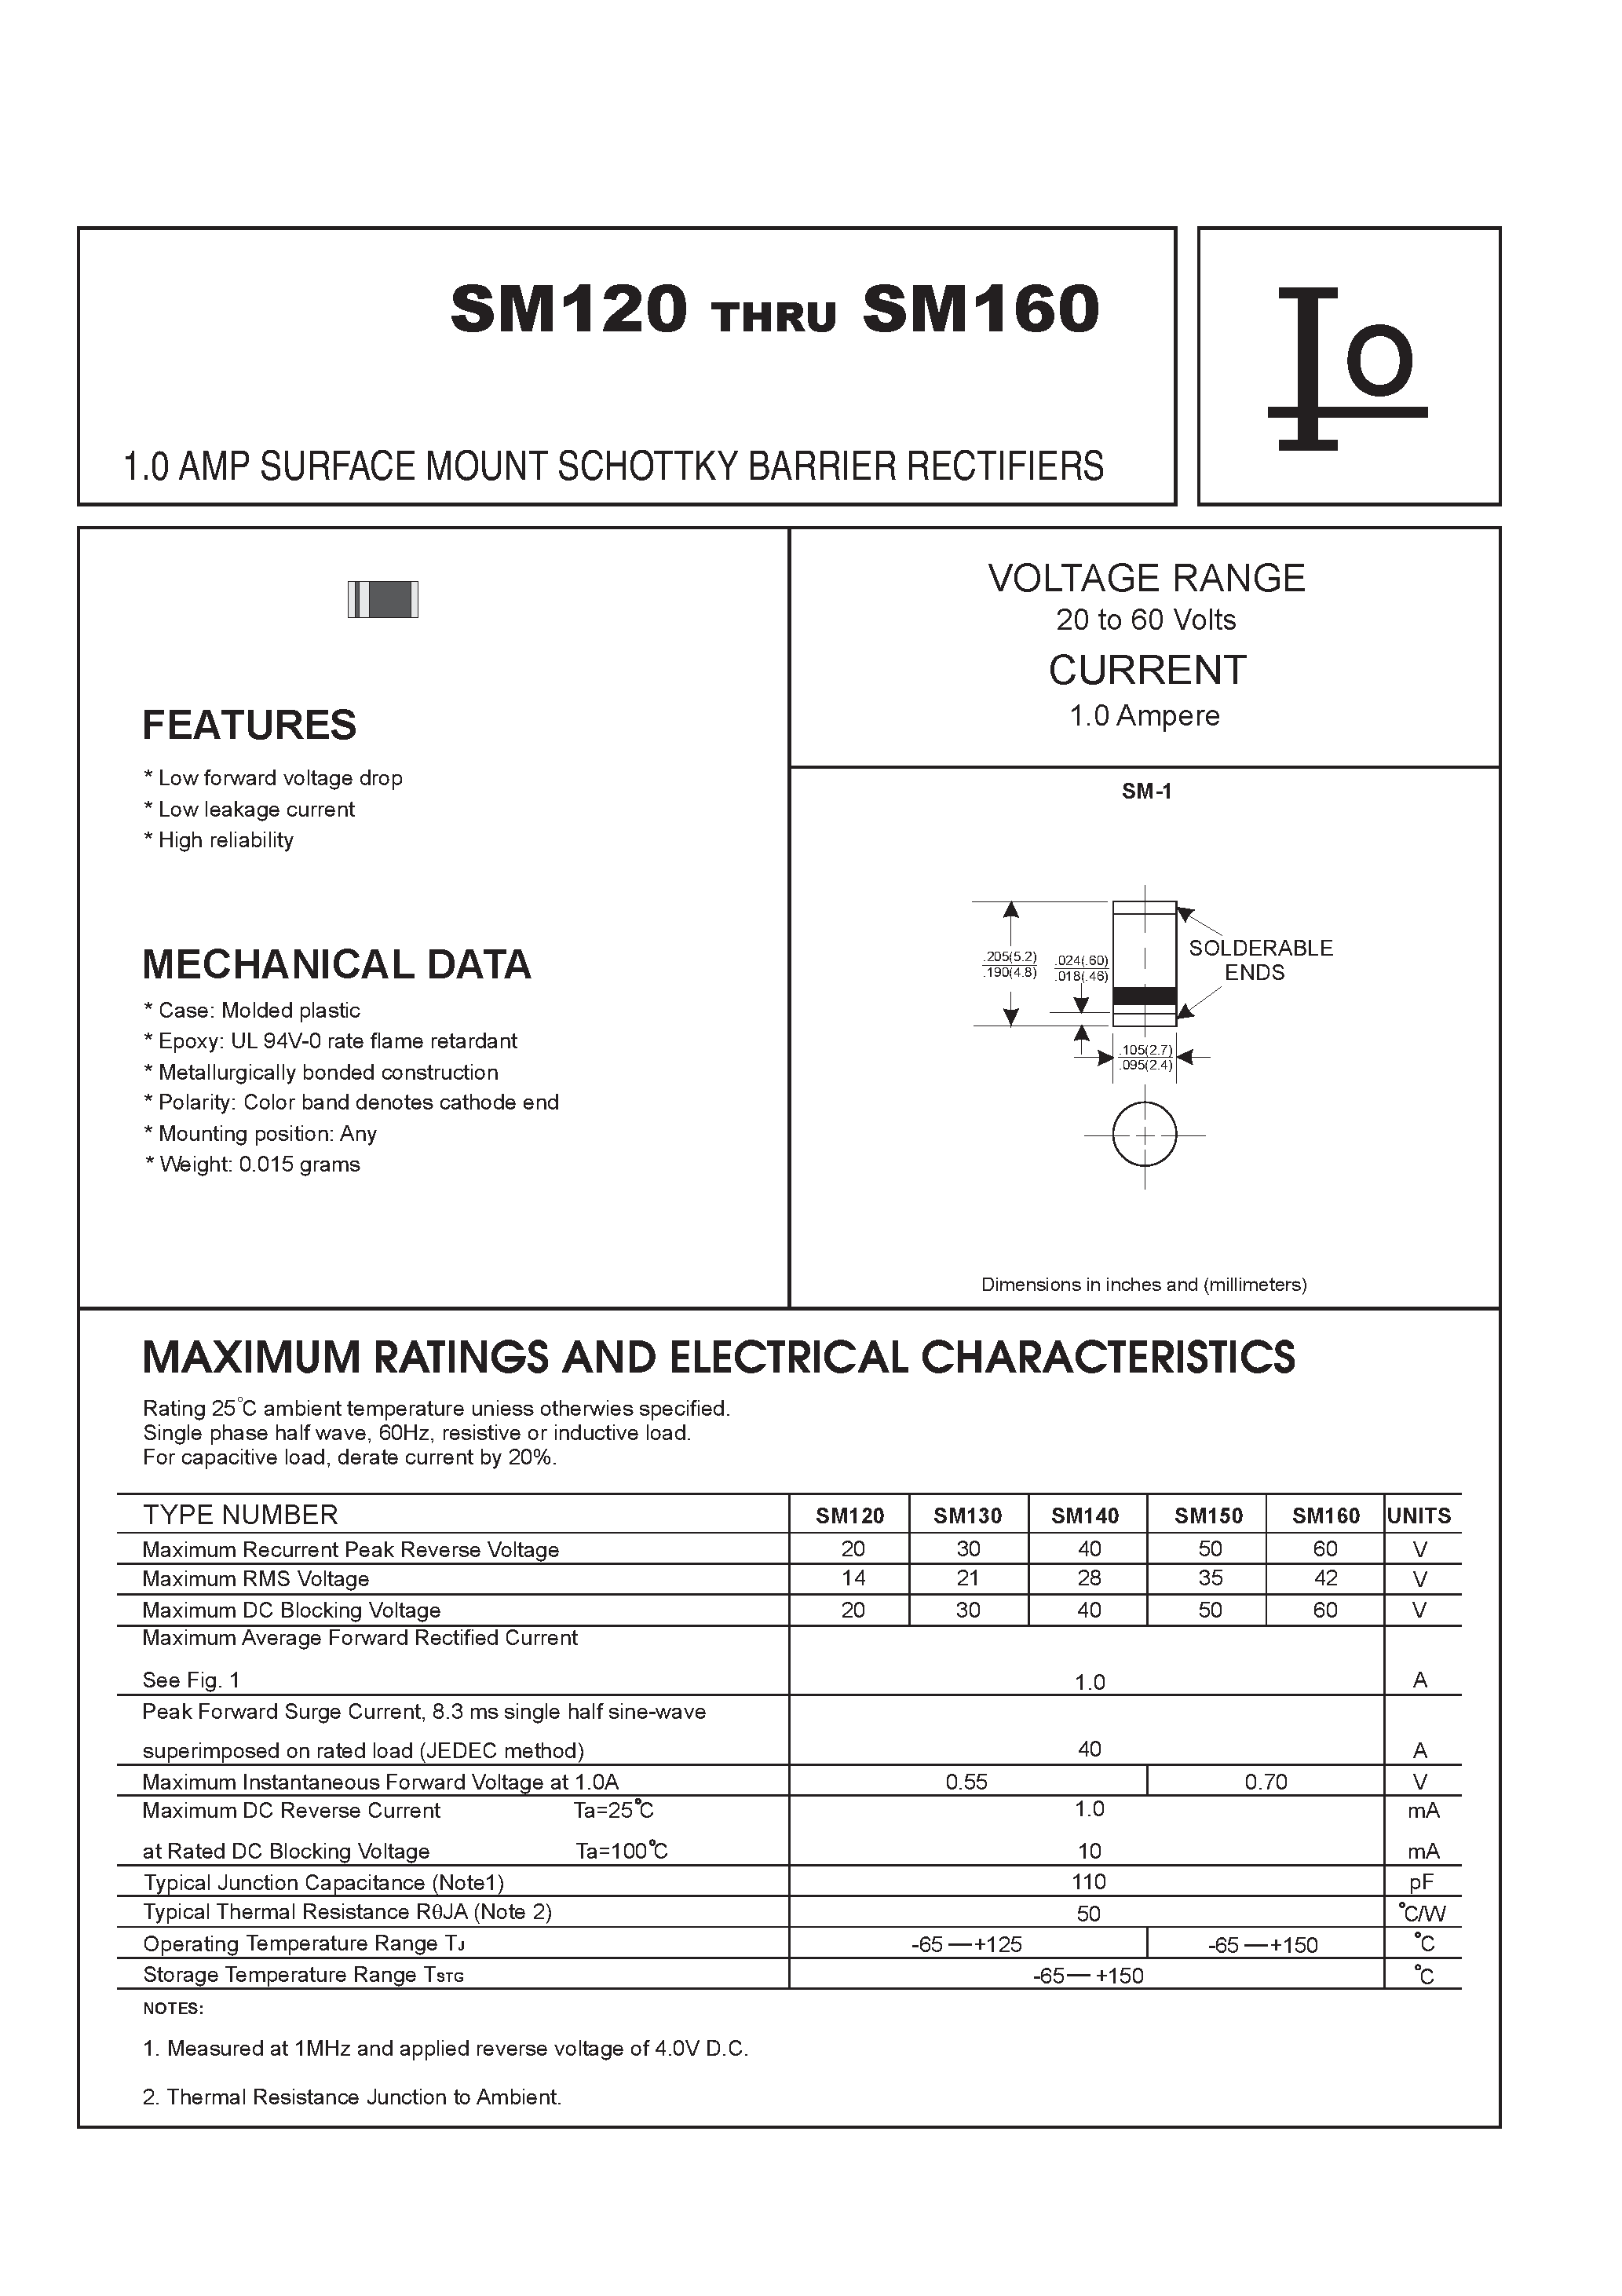 Datasheet SM120 - 1.0 AMP SURFACE MOUNT SCHOTTKY BARRIER RECTIFIERS page 1